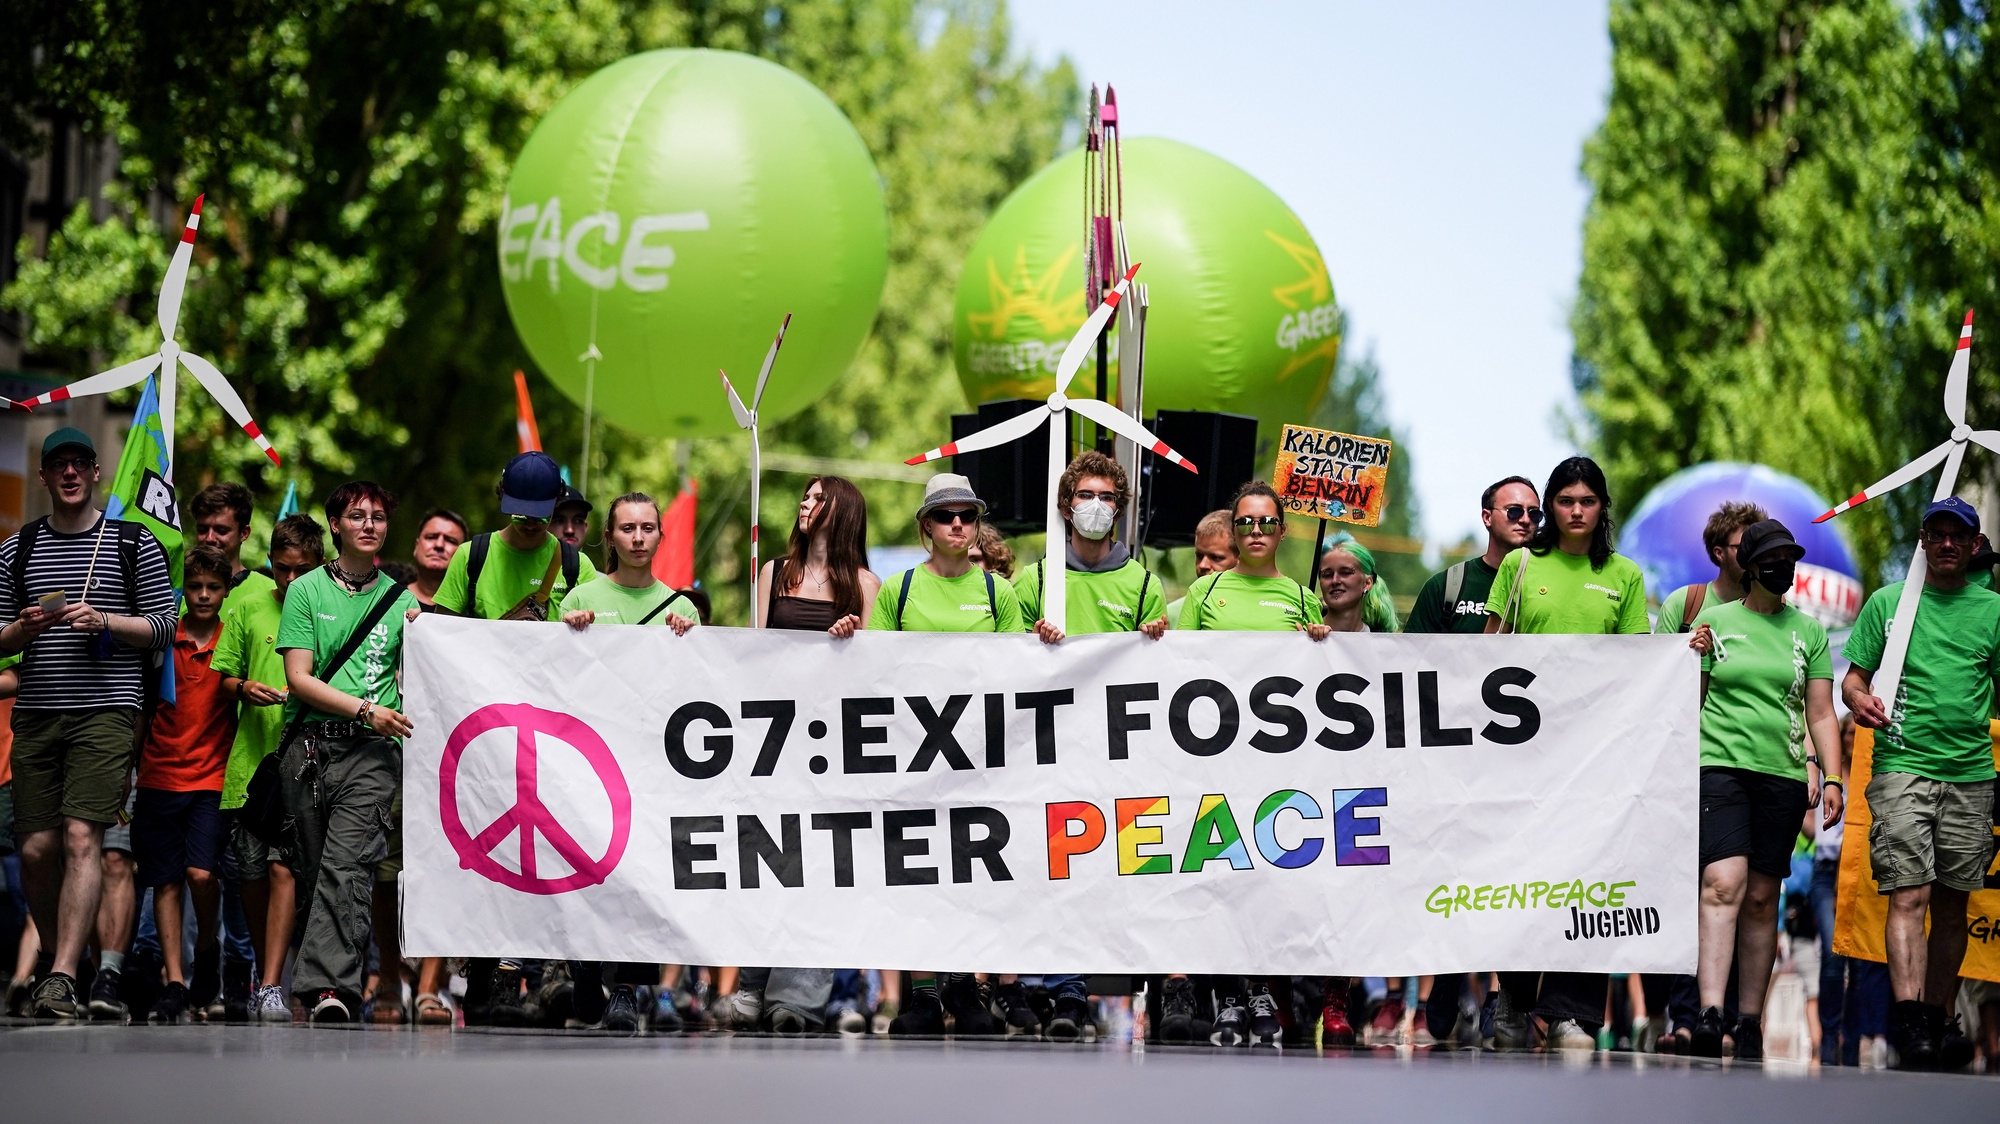 epa10033451 Protesters gather for a demonstration related to the G7 Summit in Munich, Germany, 25 June 2022. Germany is hosting the G7 summit at Elmau Castle near Garmisch-Partenkirchen from 26 to 28 June 2022.  EPA/CLEMENS BILAN